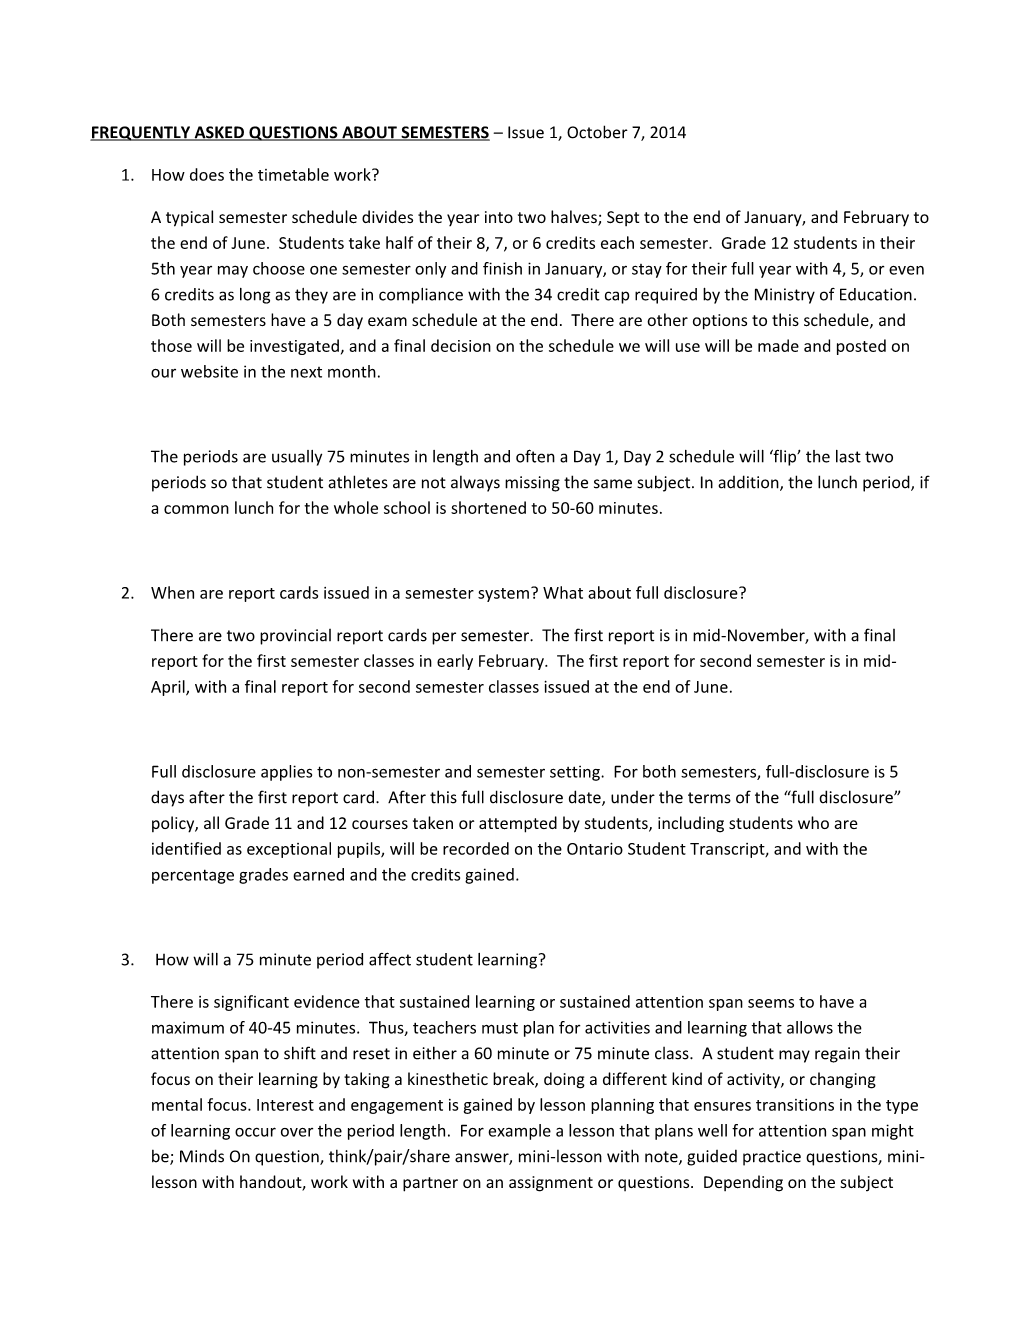 FREQUENTLY ASKED QUESTIONS ABOUT SEMESTERS Issue 1, October 7, 2014